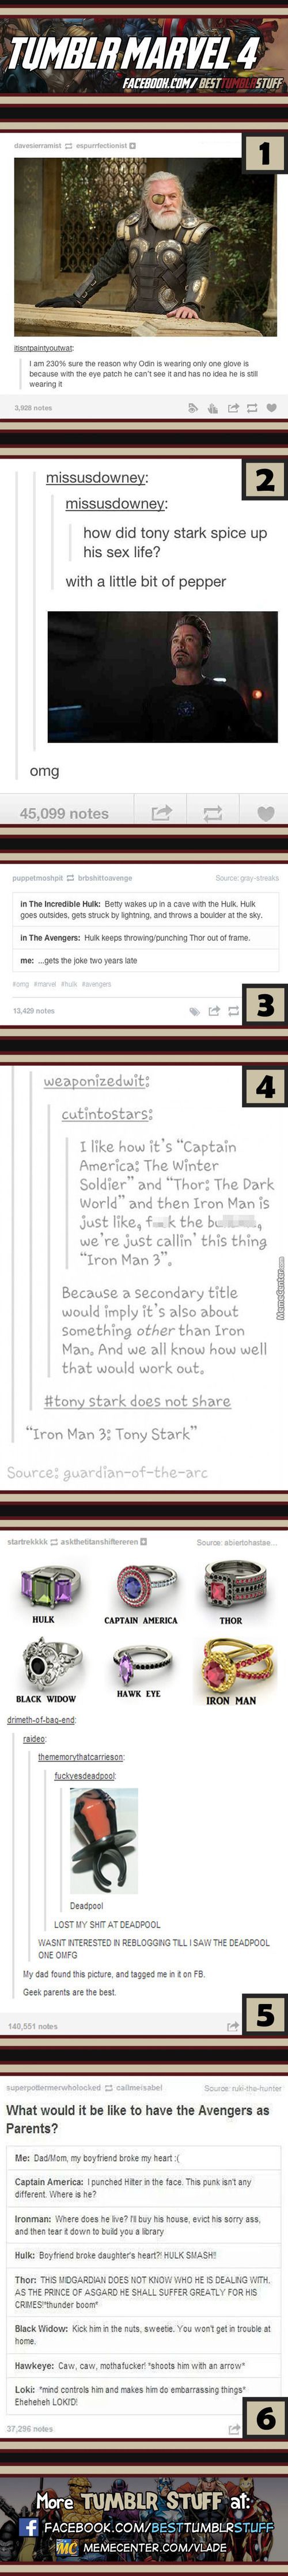 Tumblr Marvel #4. The Thor and Hulk joke is hilarious…how’d I get that two years late?!